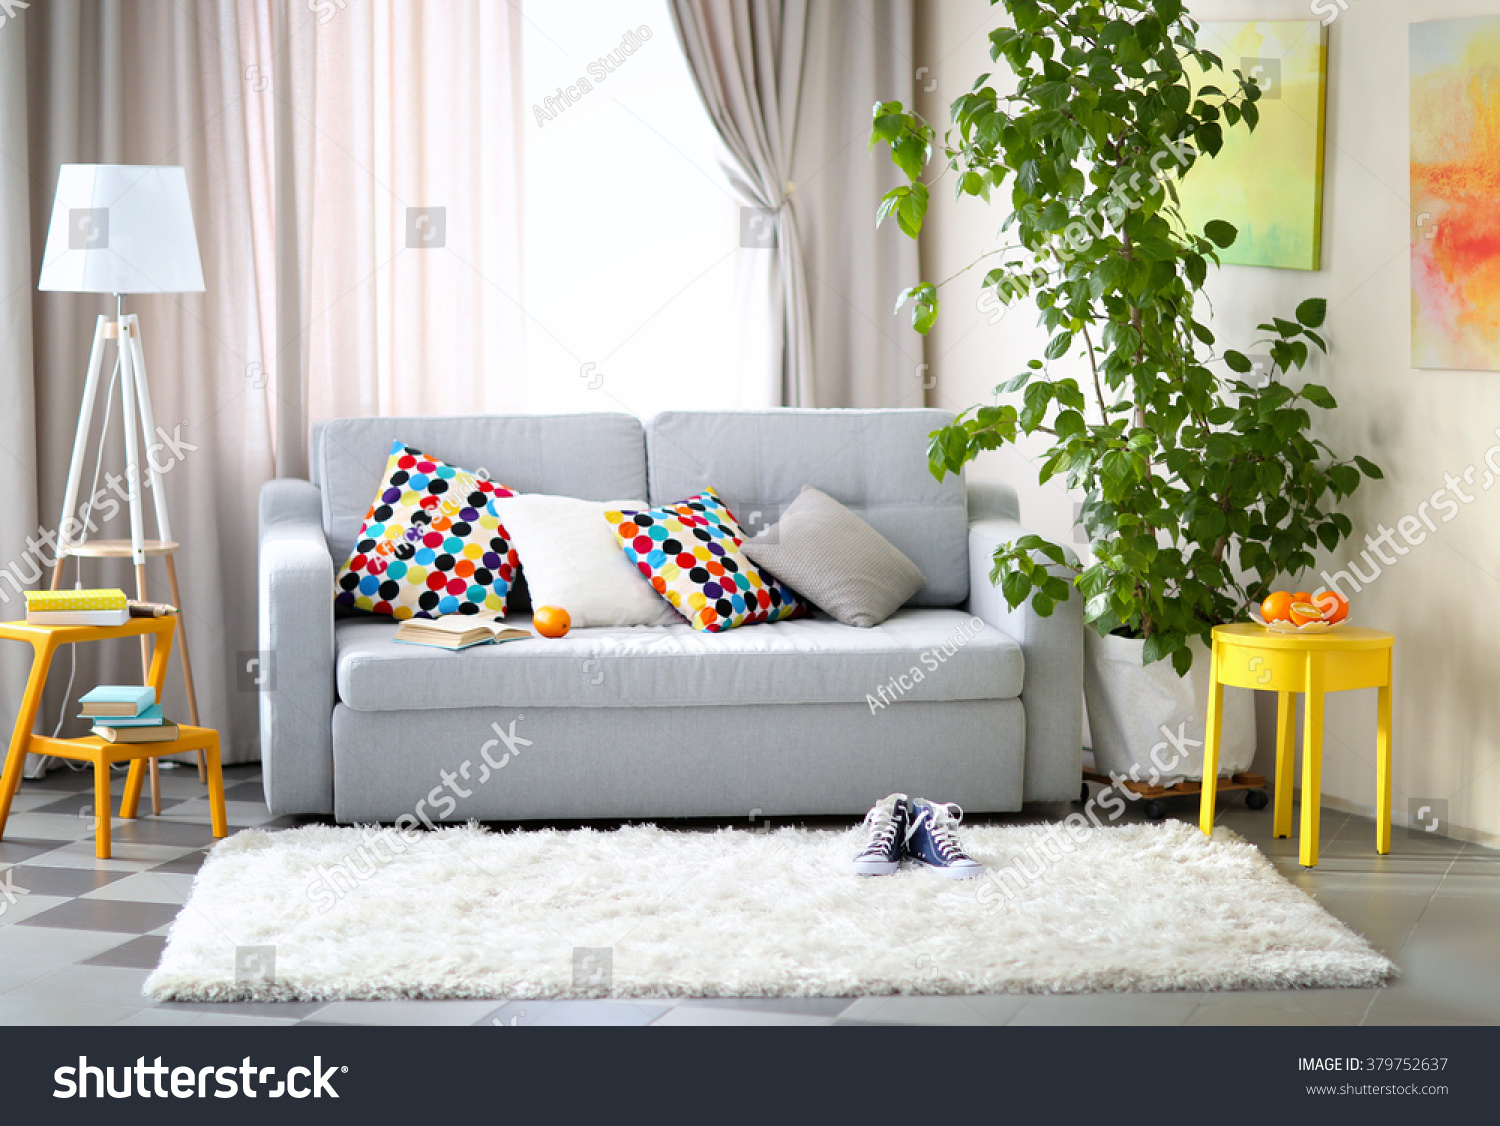 Living room interior with sofa, lamp and green tree #379752637